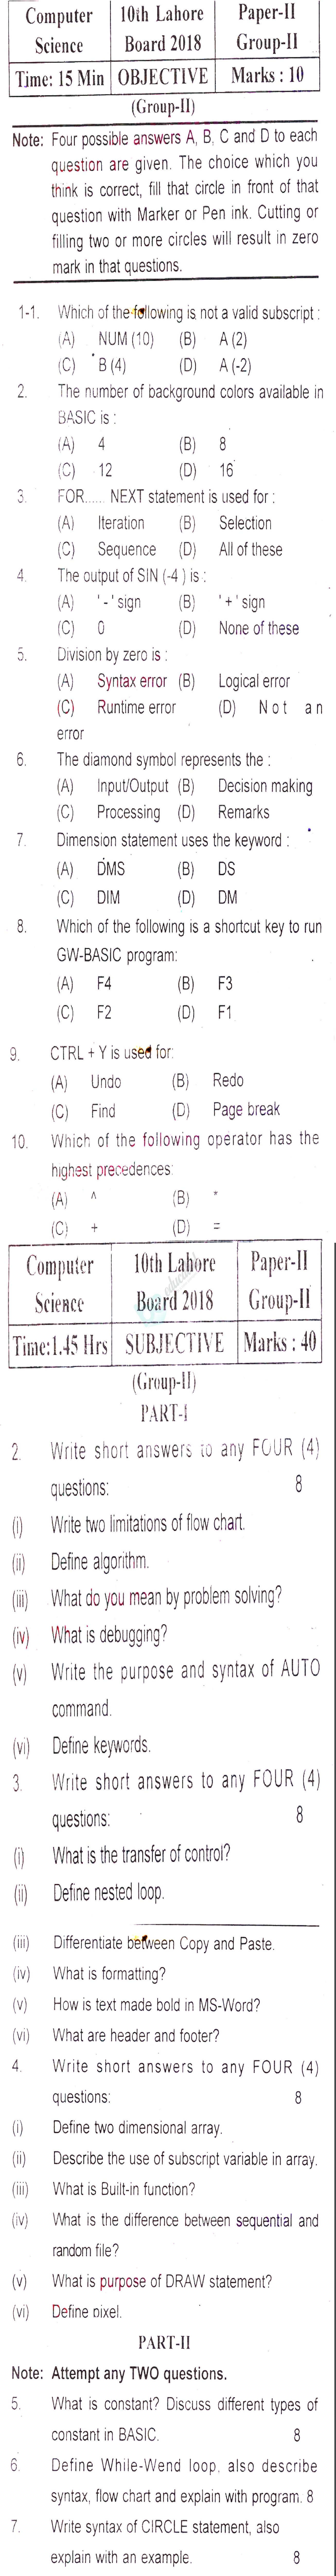 Computer Science 10th English Medium Past Paper Group 2 BISE Lahore 2018